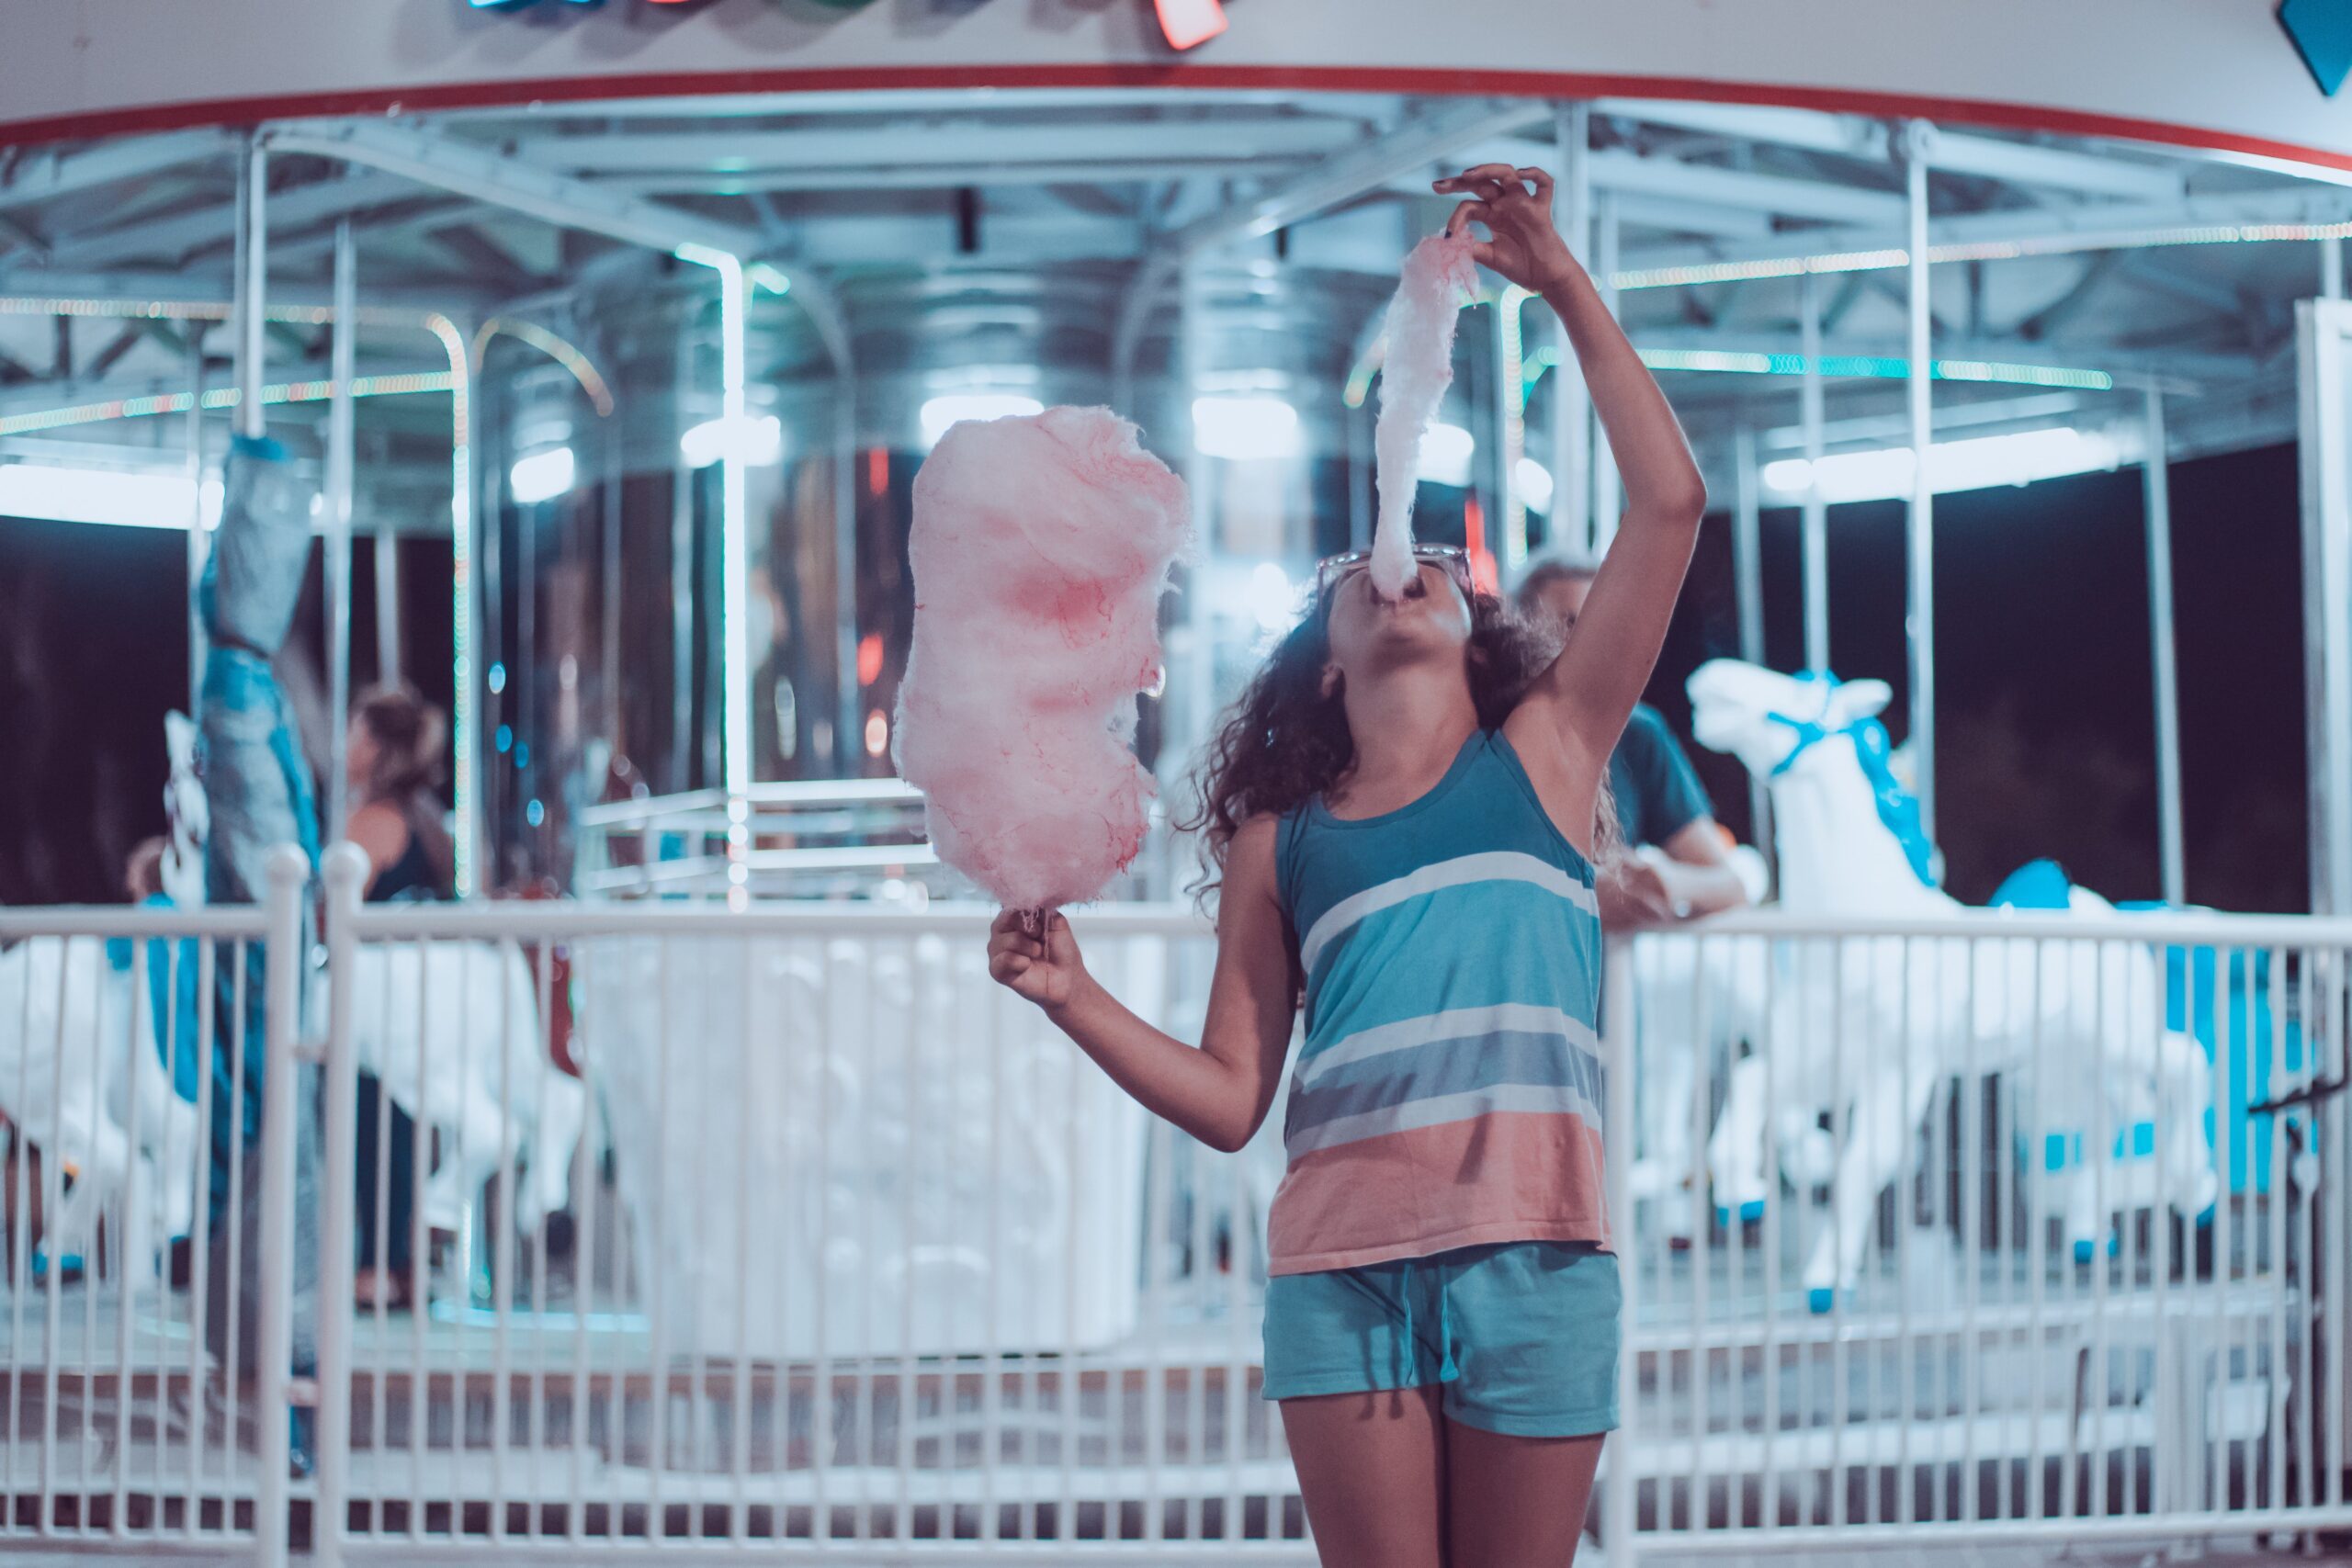 sugar Person standing in front of carousel while eating cotton candy